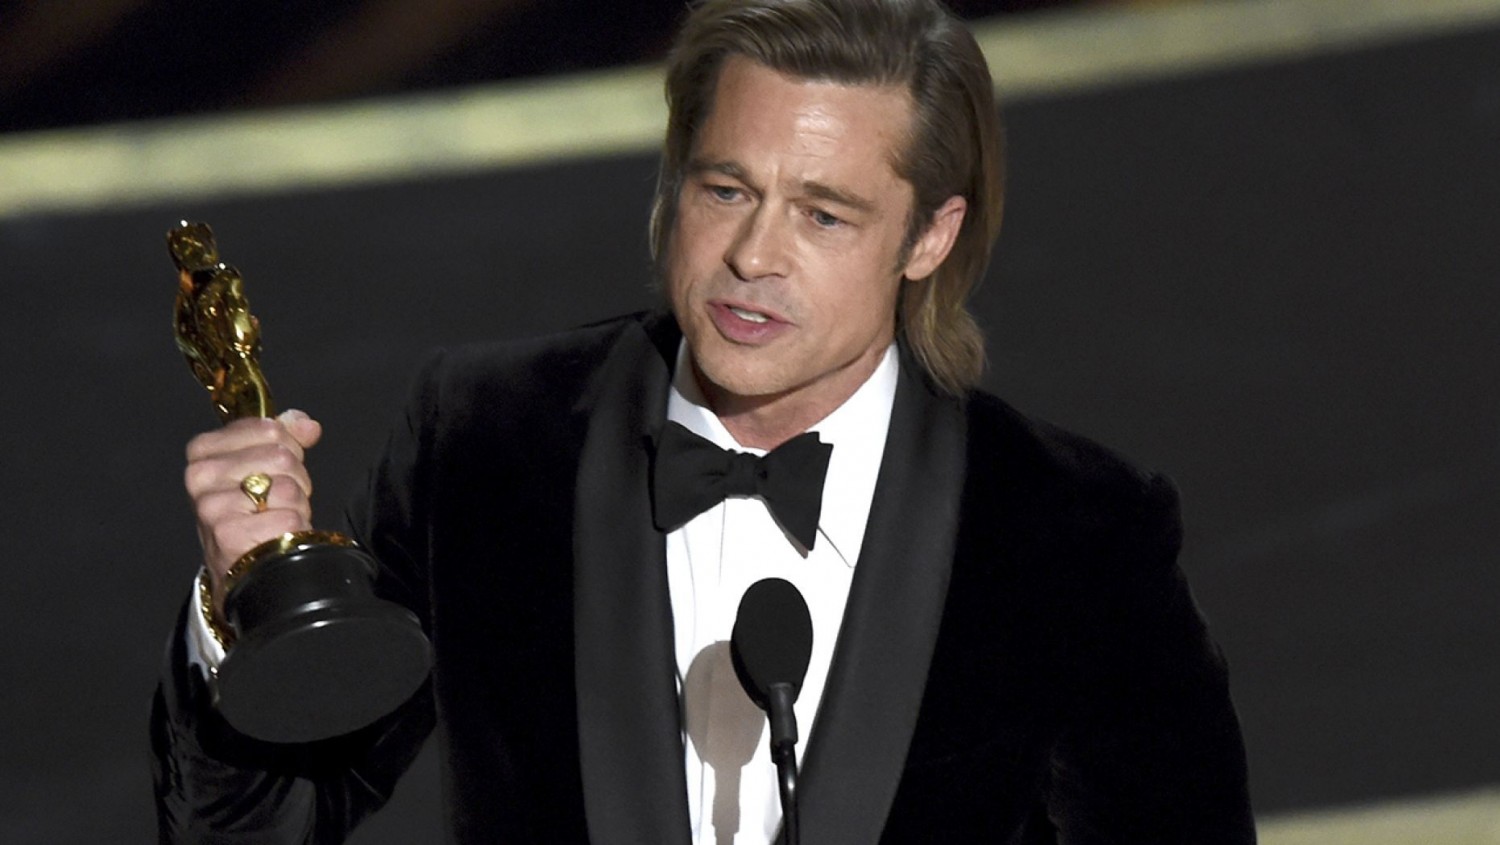 Brad Pitt accepts the award for best performance by an actor in a supporting role for 'Once Upon a Time in Hollywood' at the Oscars on Sunday, Feb. 9, 2020, at the Dolby Theatre in Los Angeles. (AP Photo/Chris Pizzello)